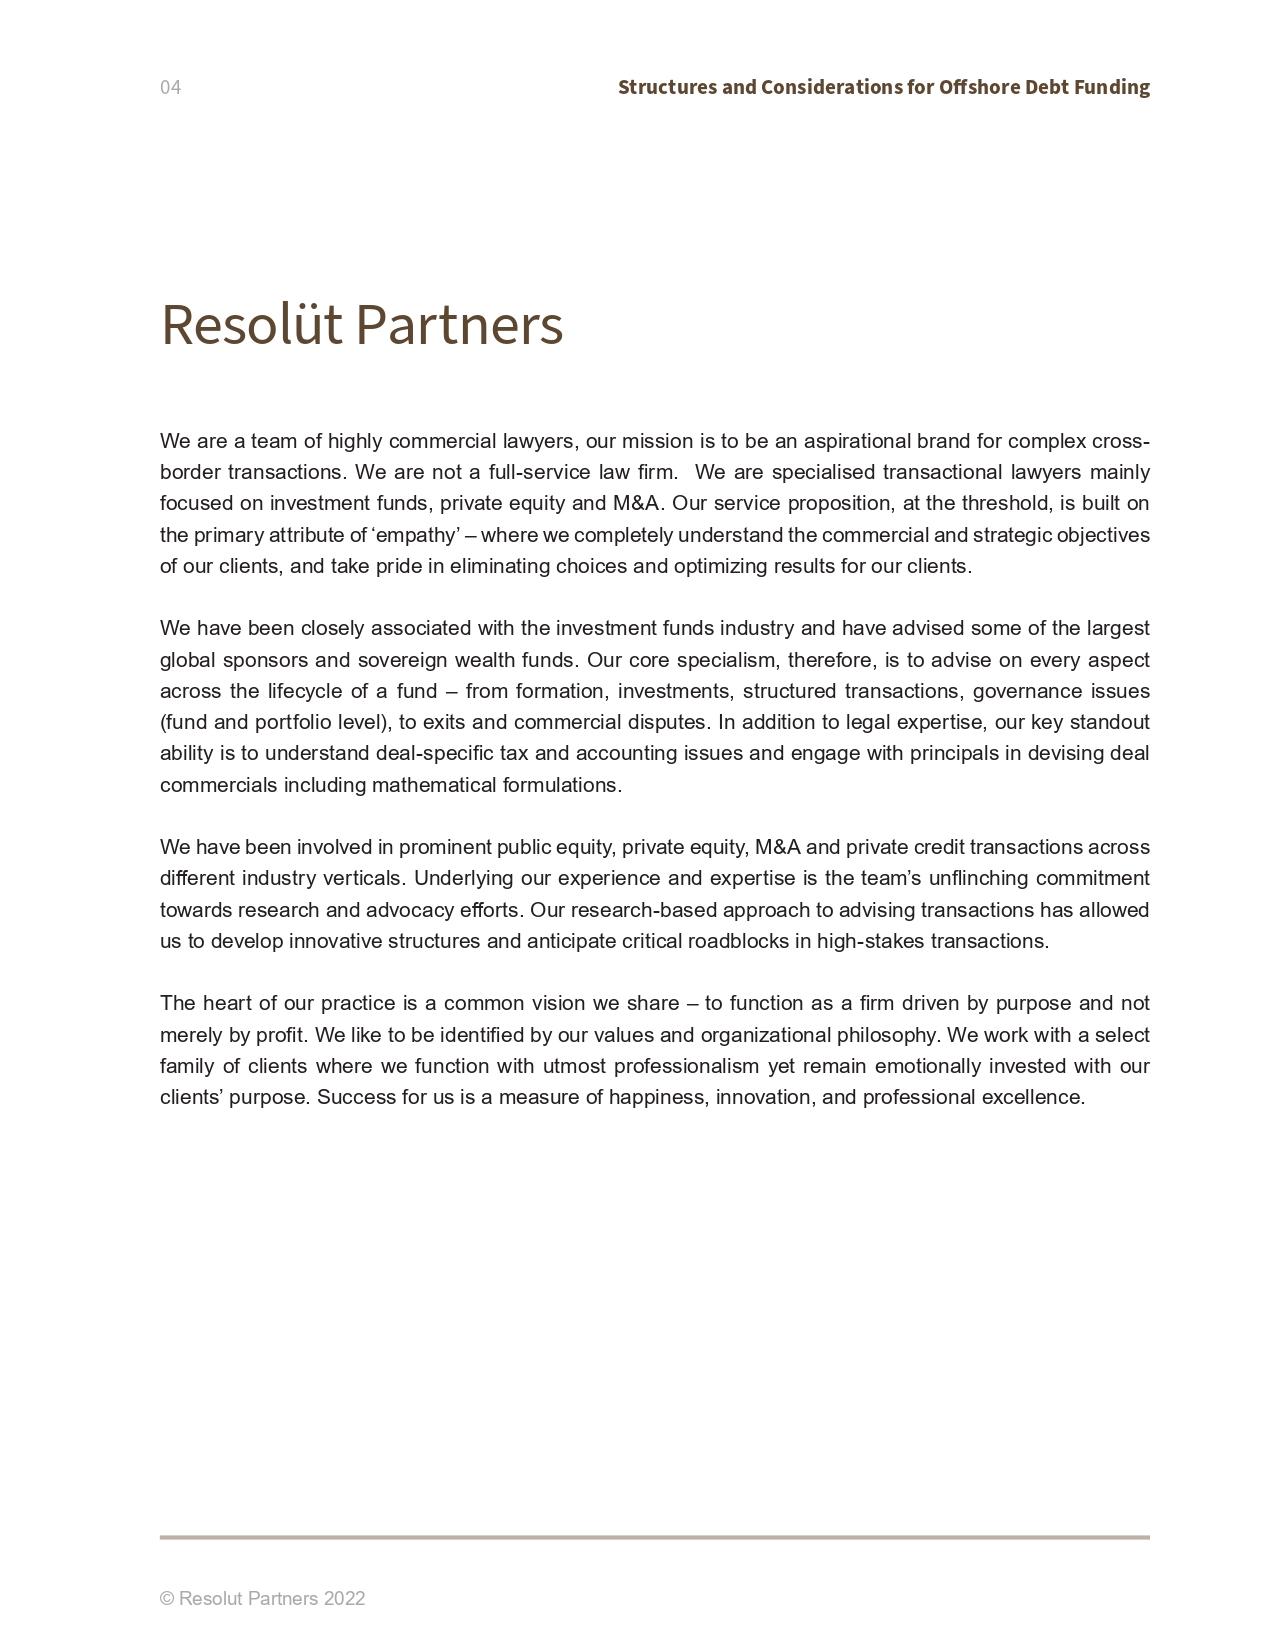 Print Final Debt Funding - Resolut Partners [_page-0004